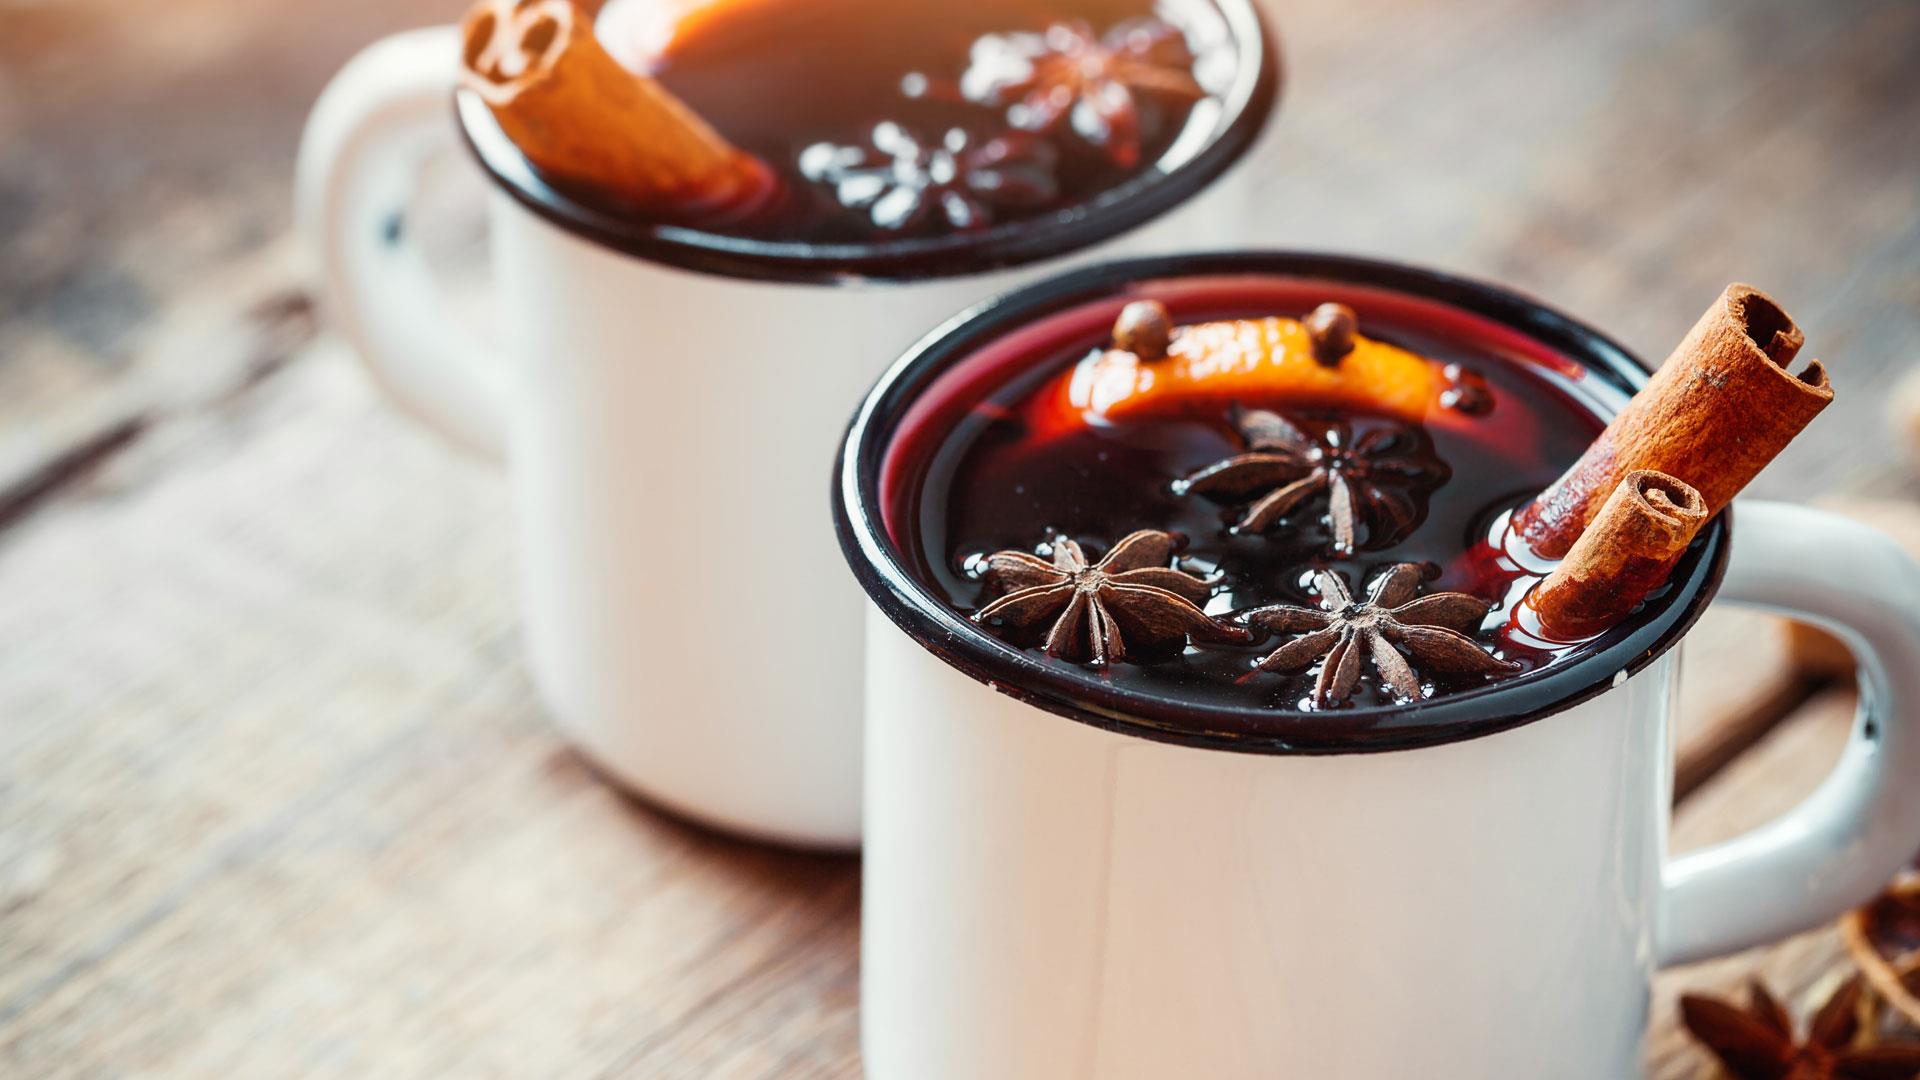 Classic mulled wine